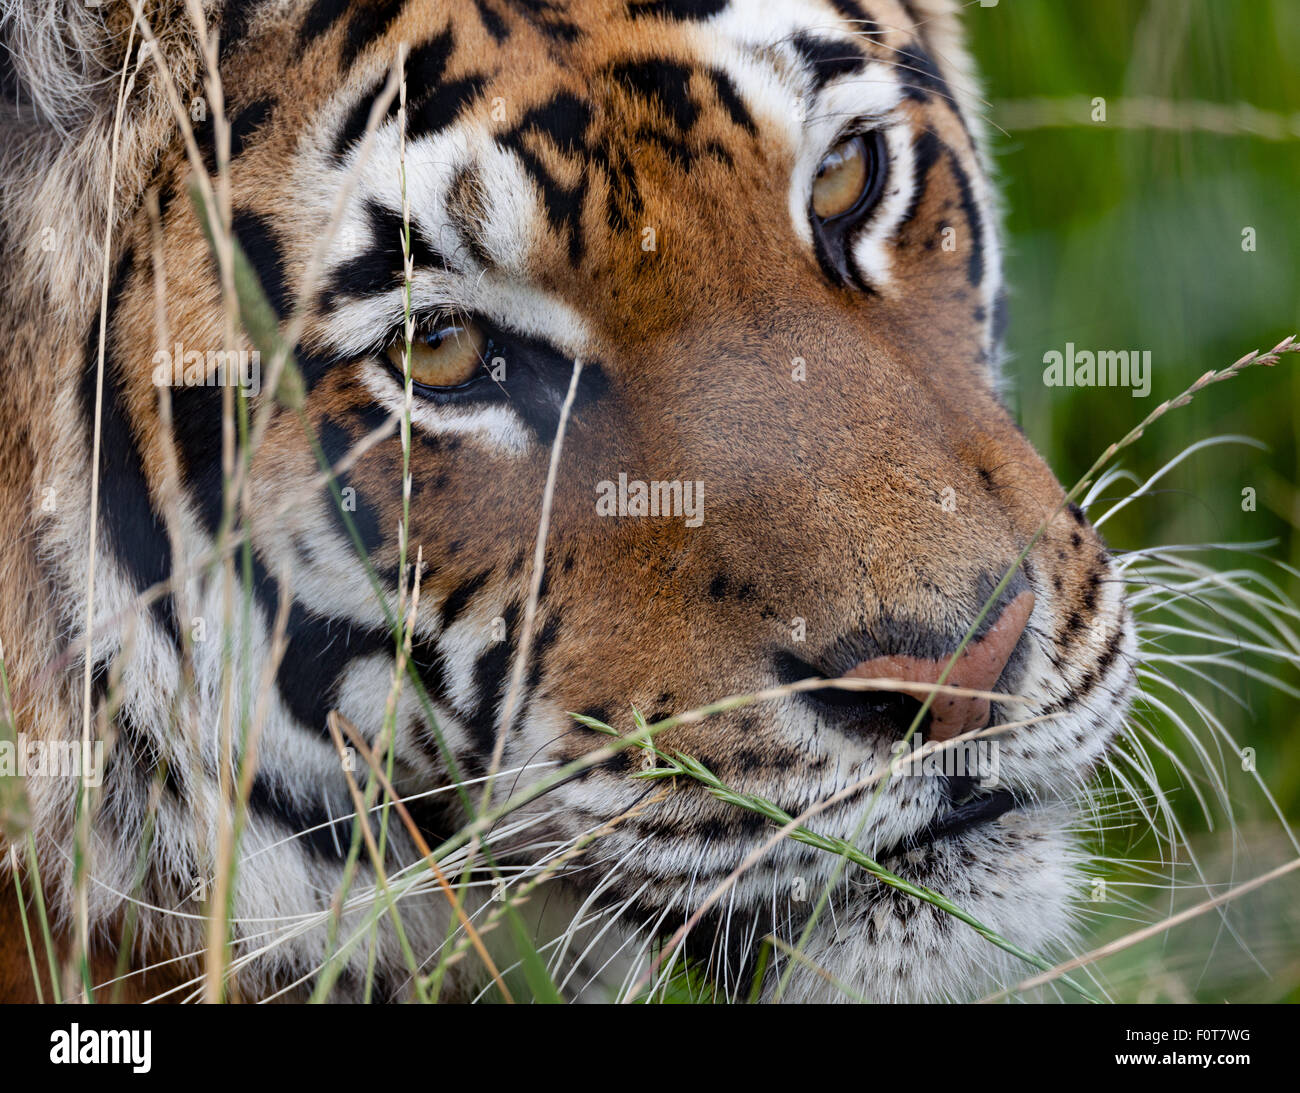 Tiger in the grass close up headshot Stock Photo